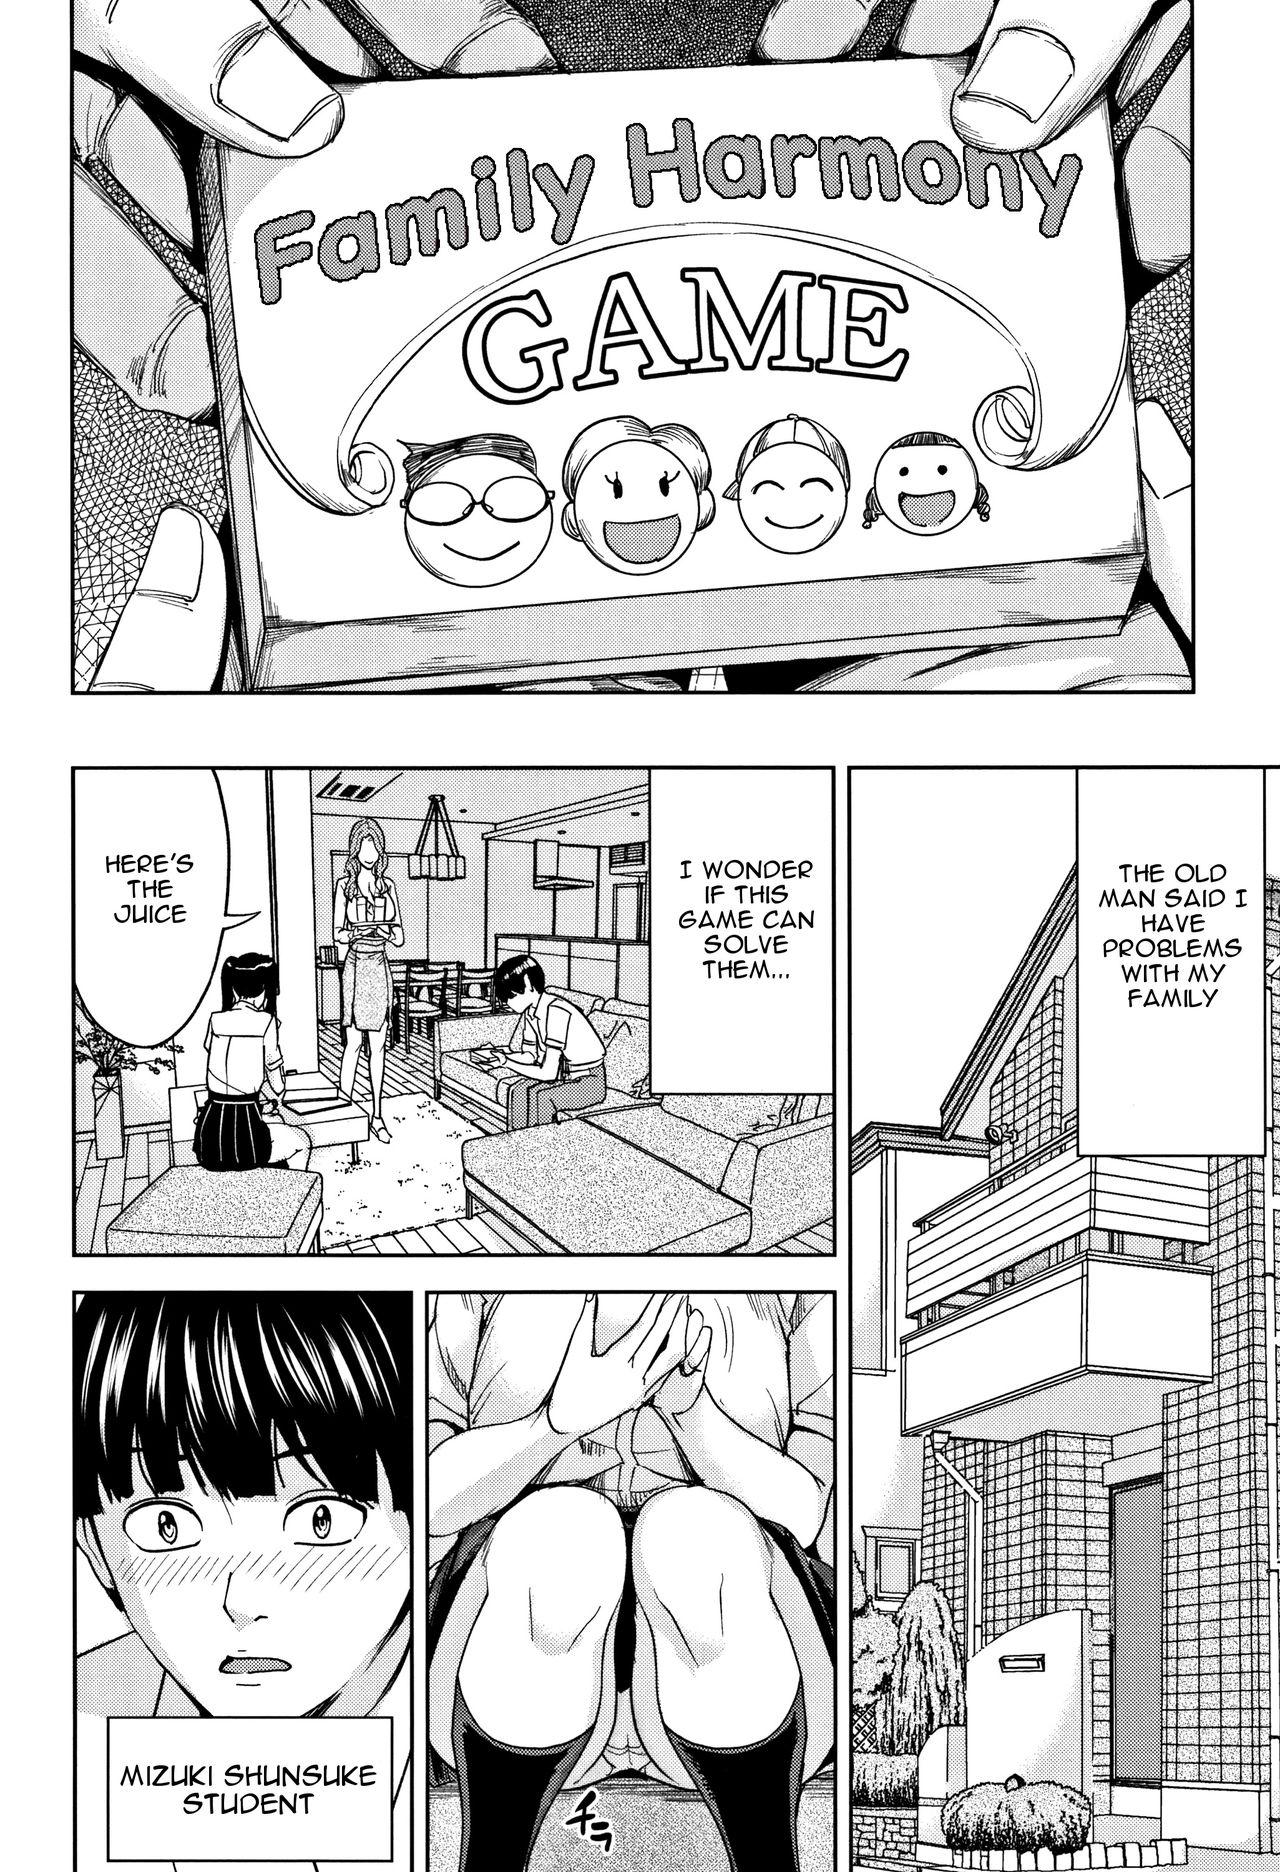 Wet Pussy Kazoku Soukan Game - family Incest game Ch. 1 Cheerleader - Page 9